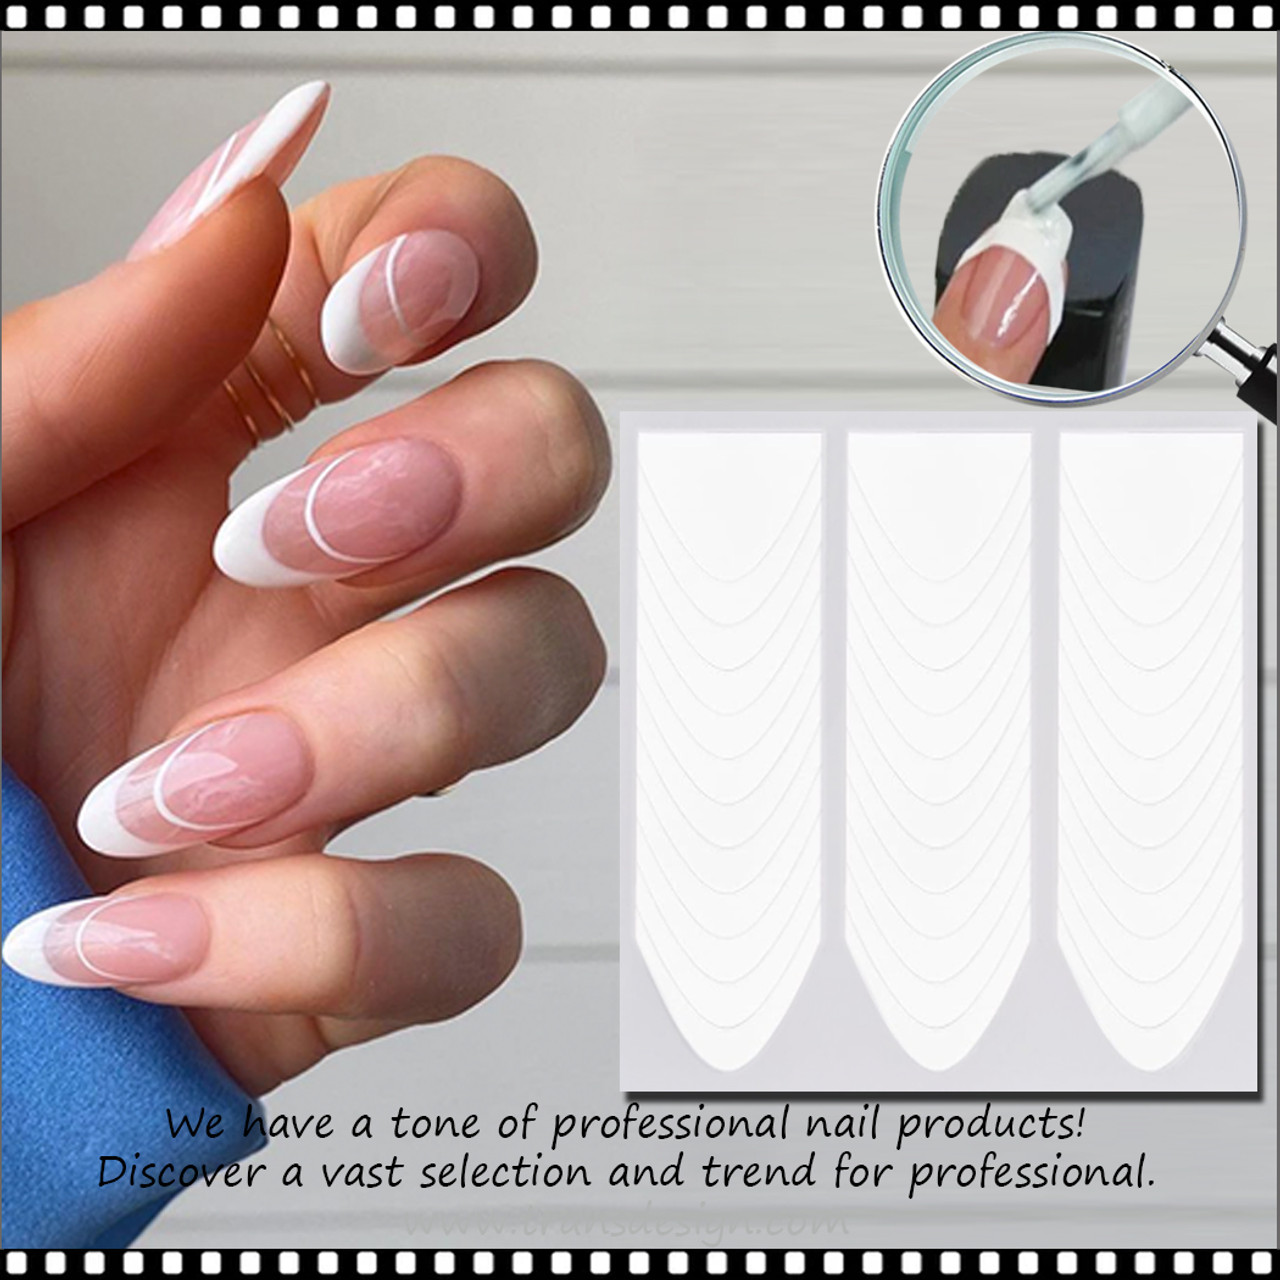 FRENCH MANICURE Guides, Smile Line Self-Adhesive Stickers 3 Sheets